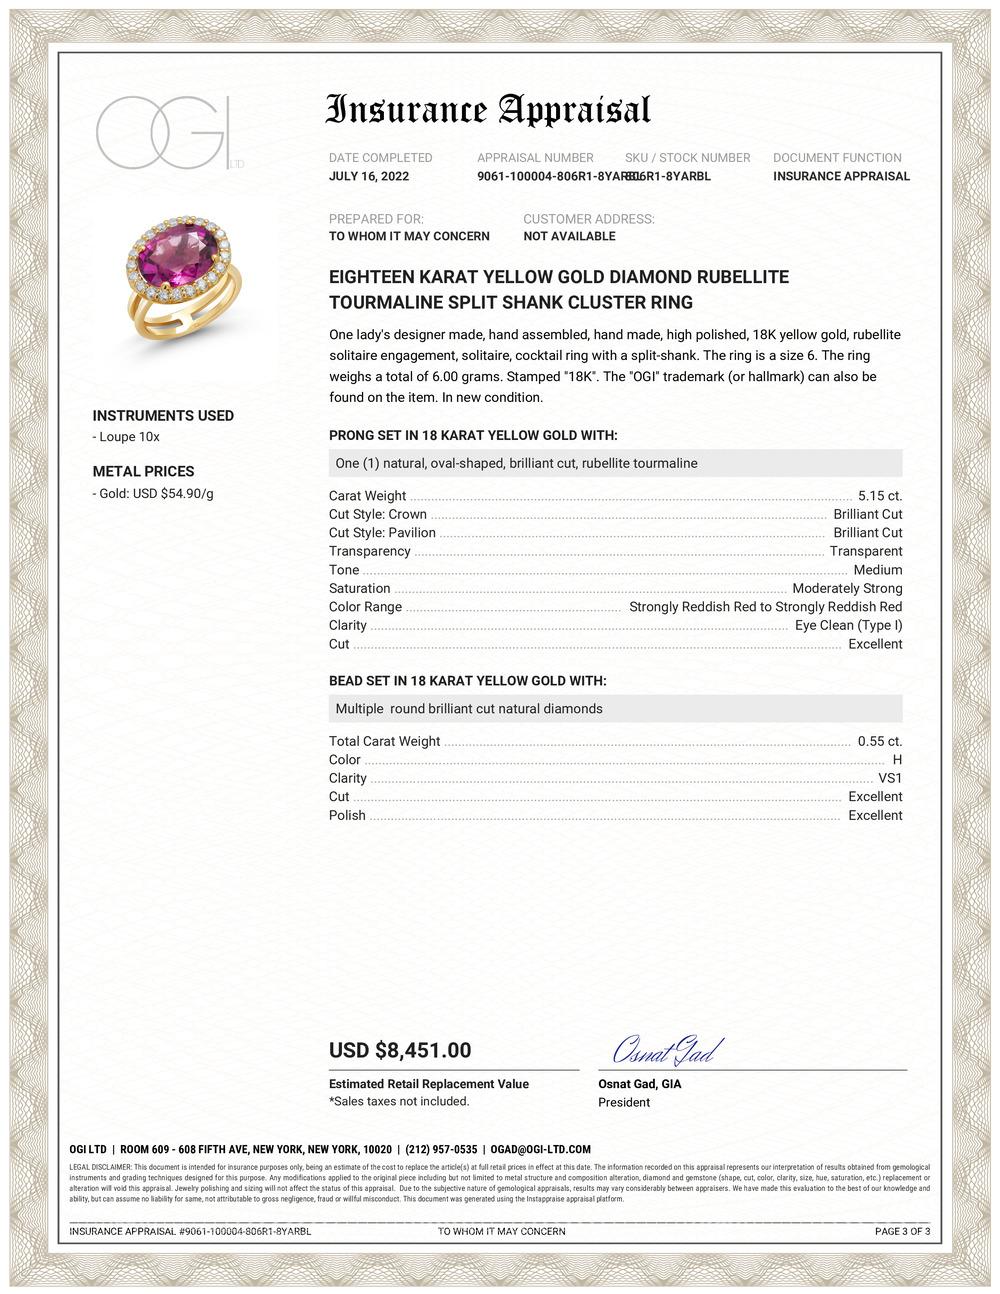 18 karat yellow gold double split shank cocktail ring
Diamonds weighing 0.55 carats
One natural cushion oval shaped rubellite weighing 5.15 carats
Rubellite is of deep rose red tone and almost flawless stone
Ring size 6 
Ring cannot be sized, or